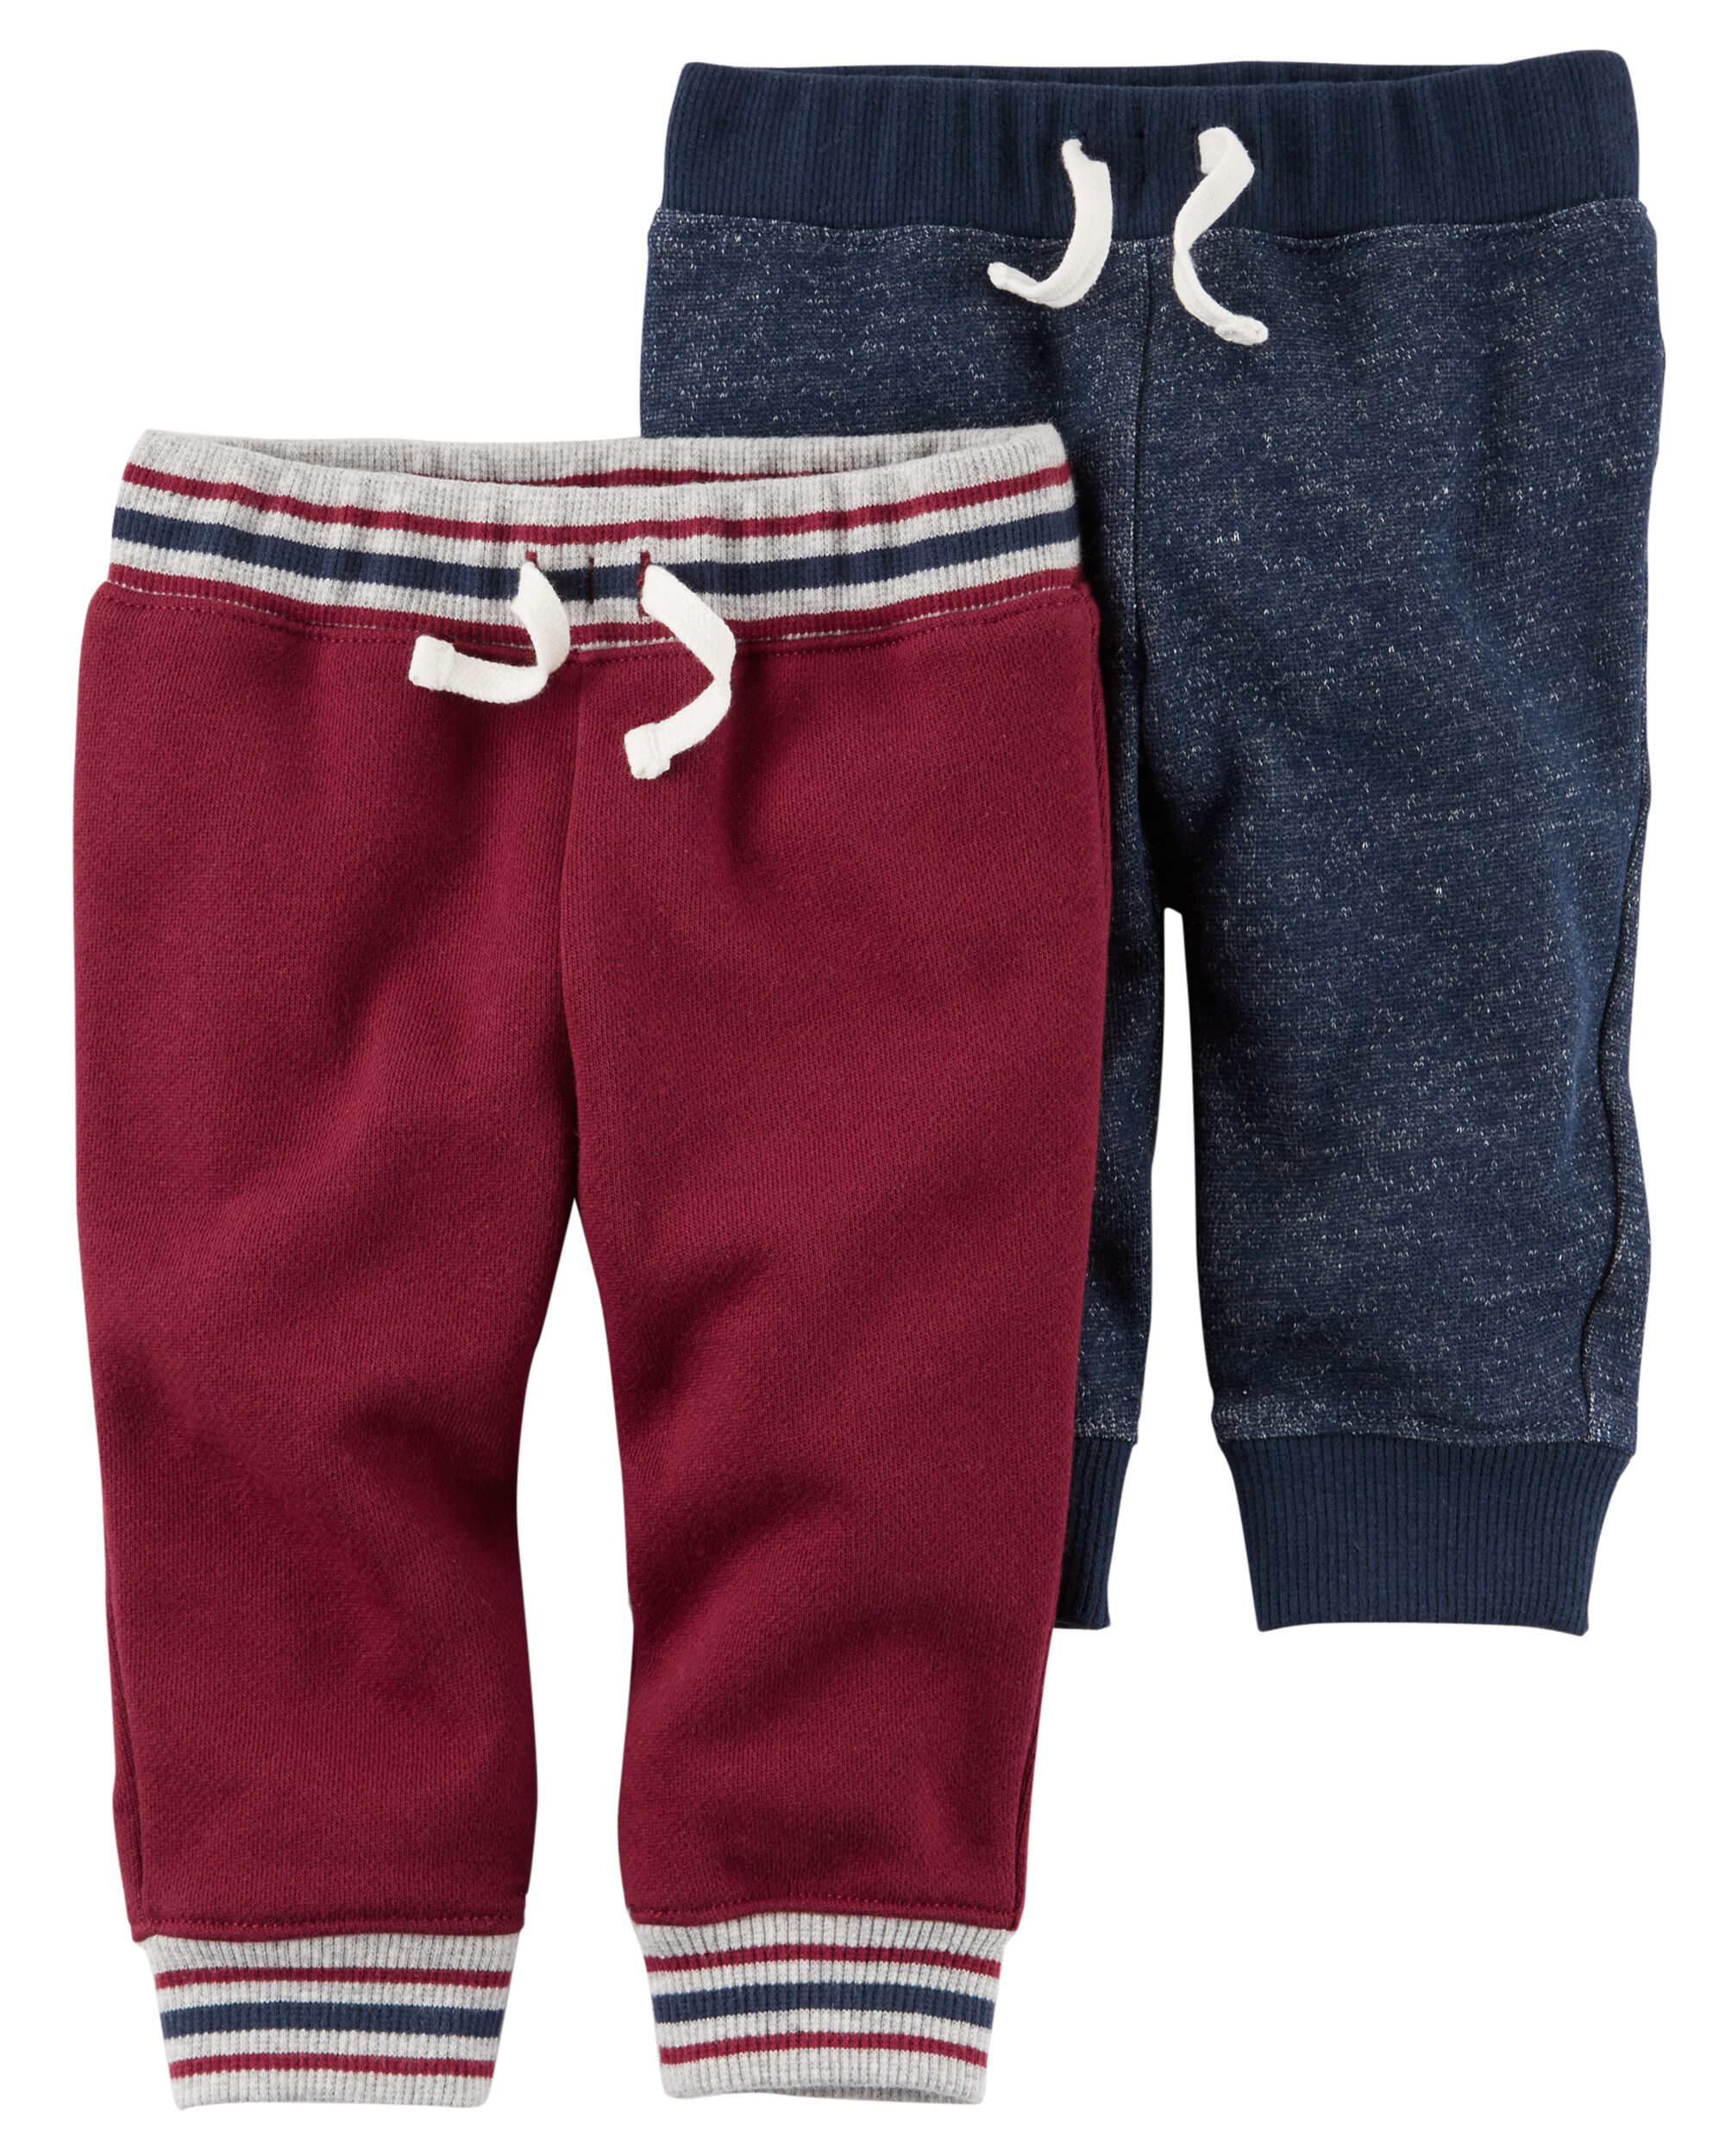 Carters Baby Boys 2-Pack Shorts